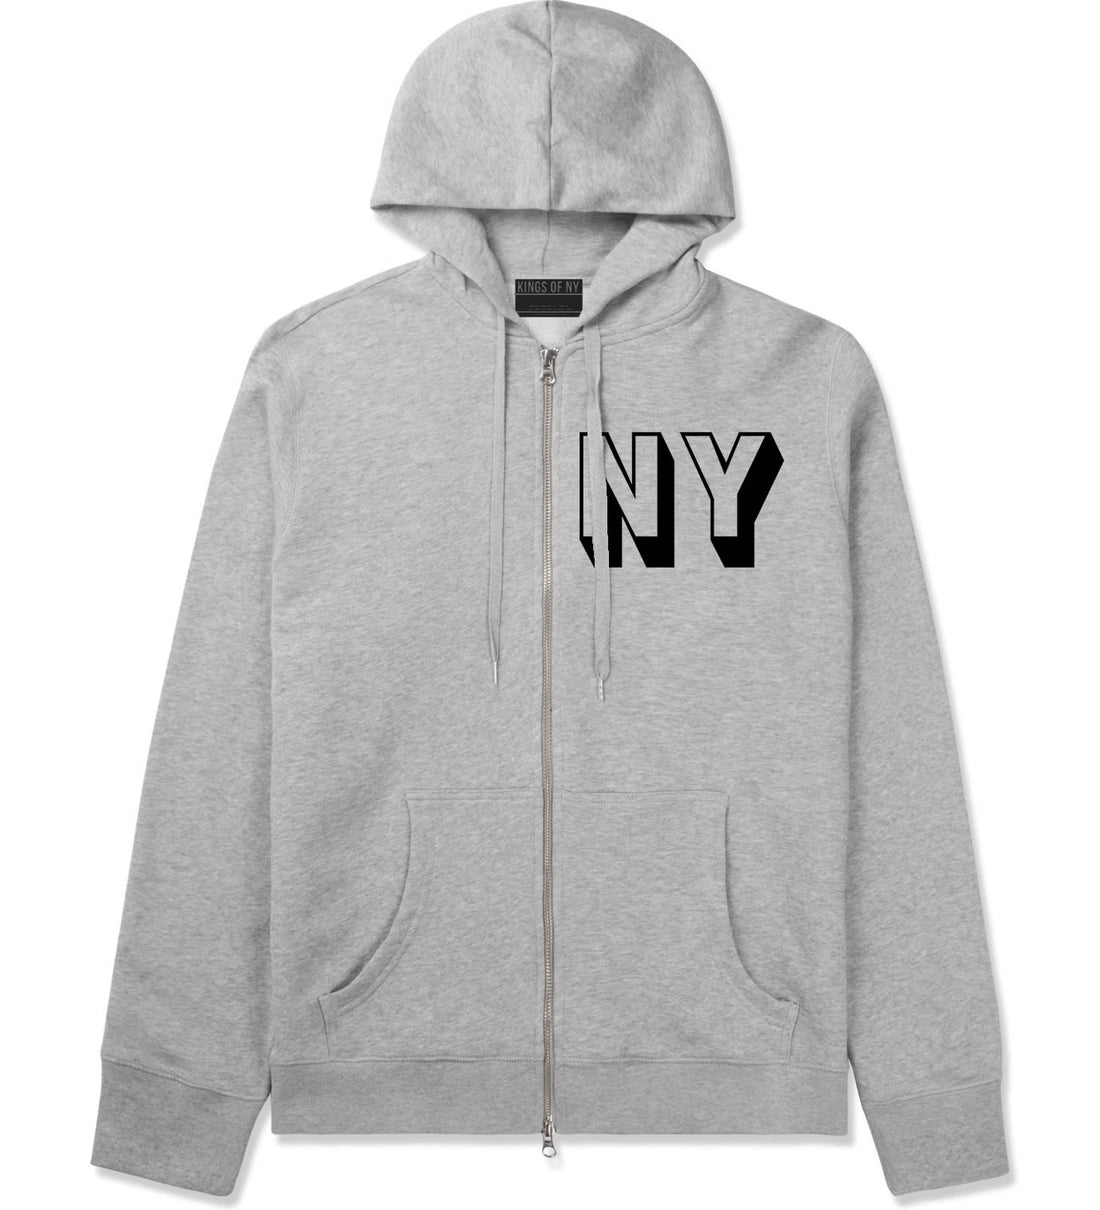 NY Block Letter New York Zip Up Hoodie in Grey By Kings Of NY